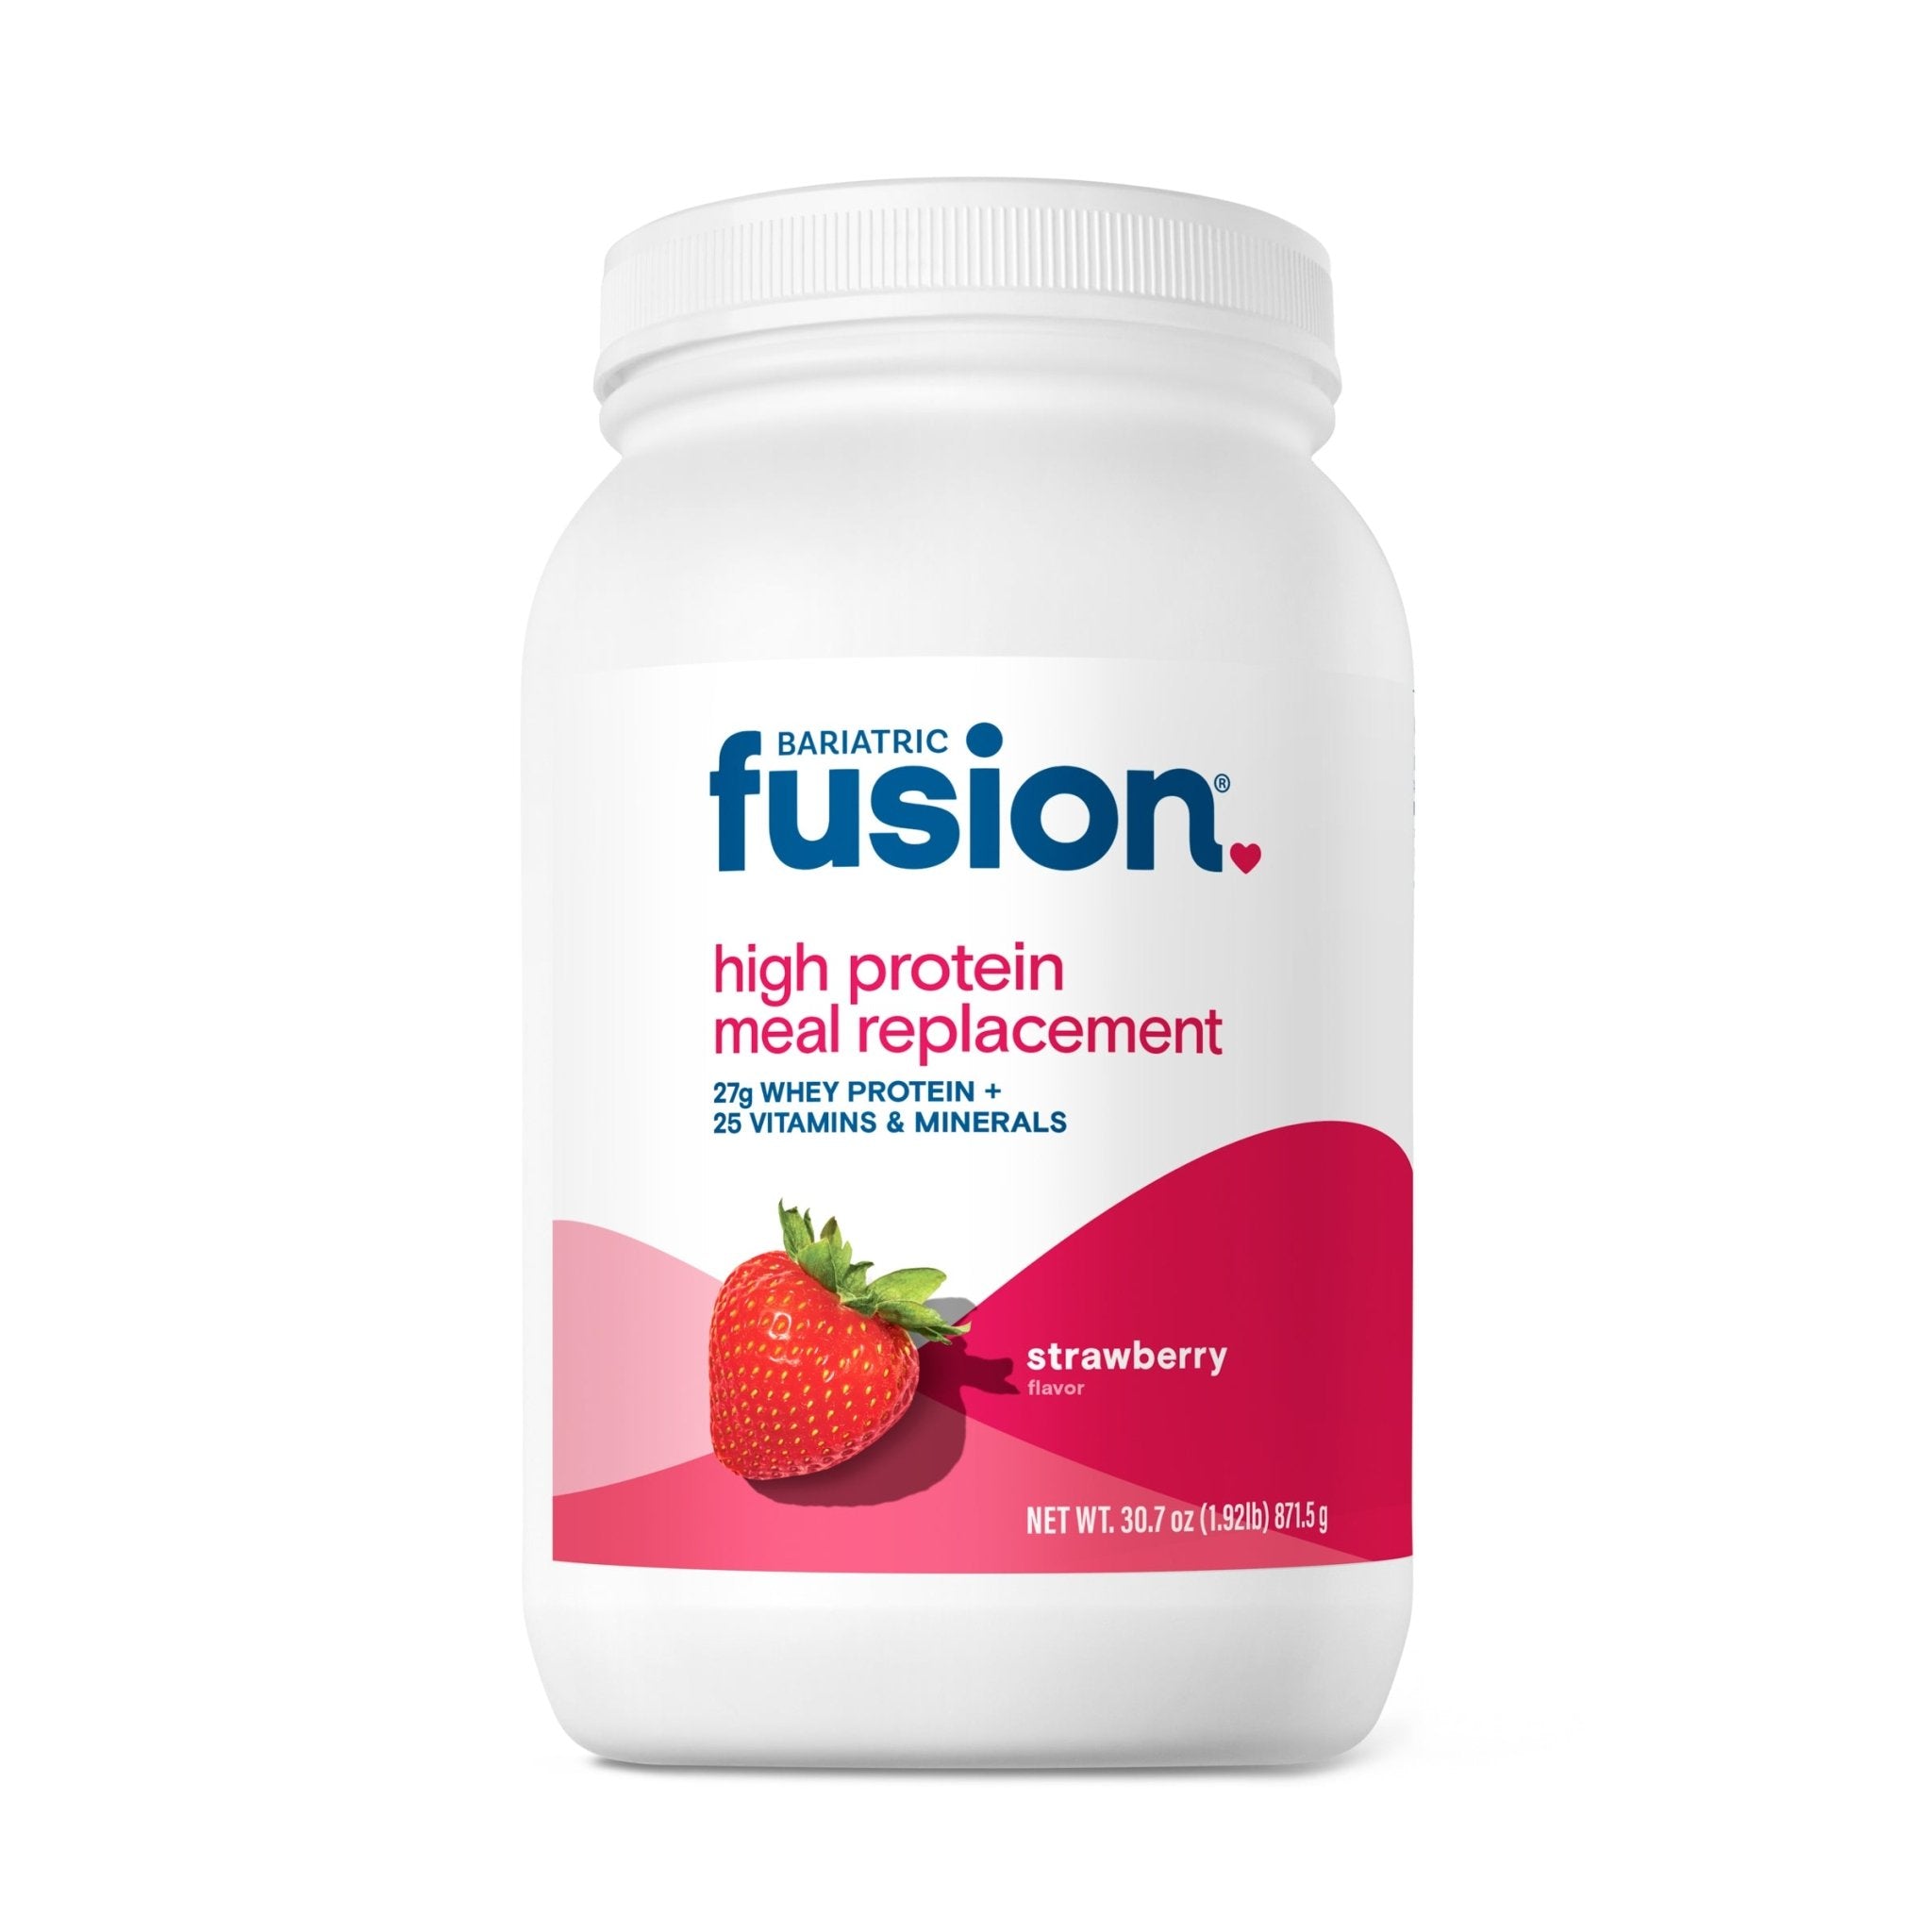 Bariatric Fusion Strawberry High Protein Meal Replacement